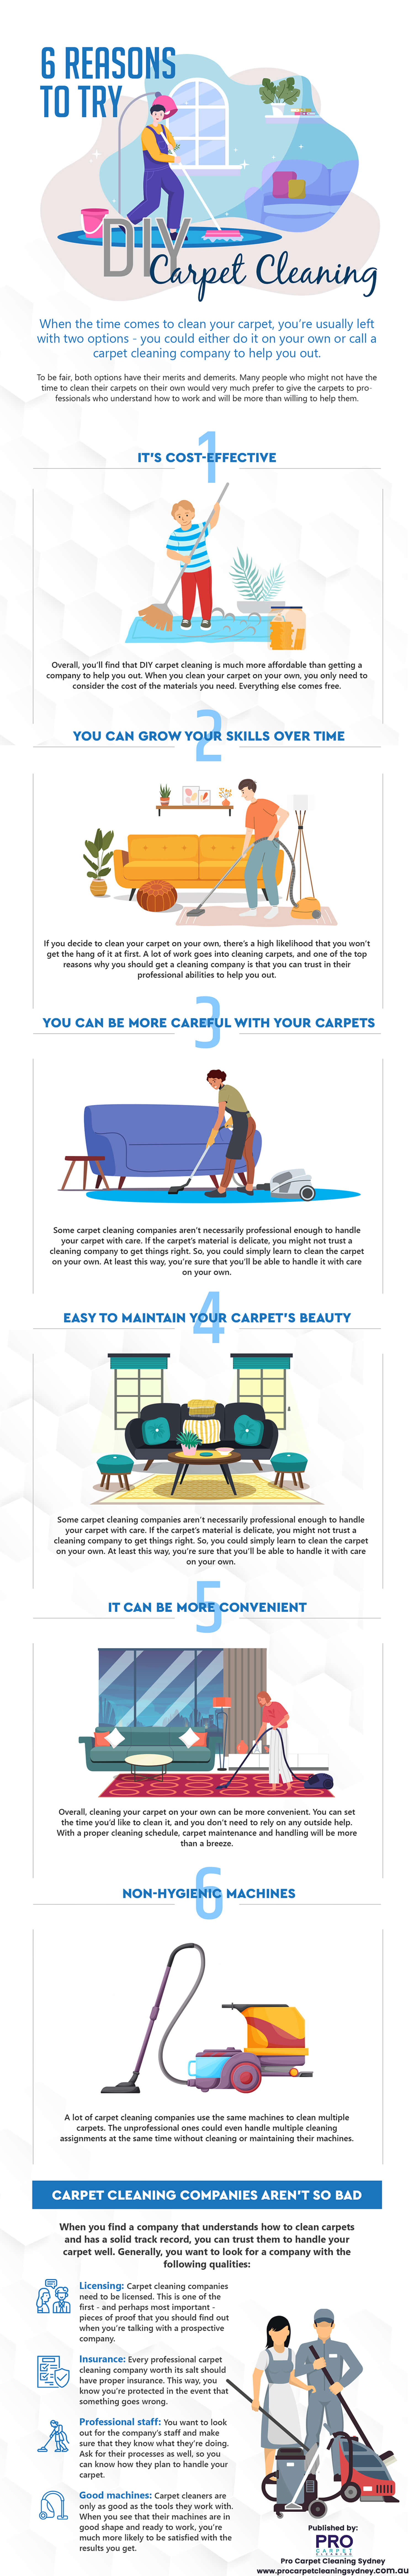 6 Reasons To DIY Carpet Cleaning - Infographic